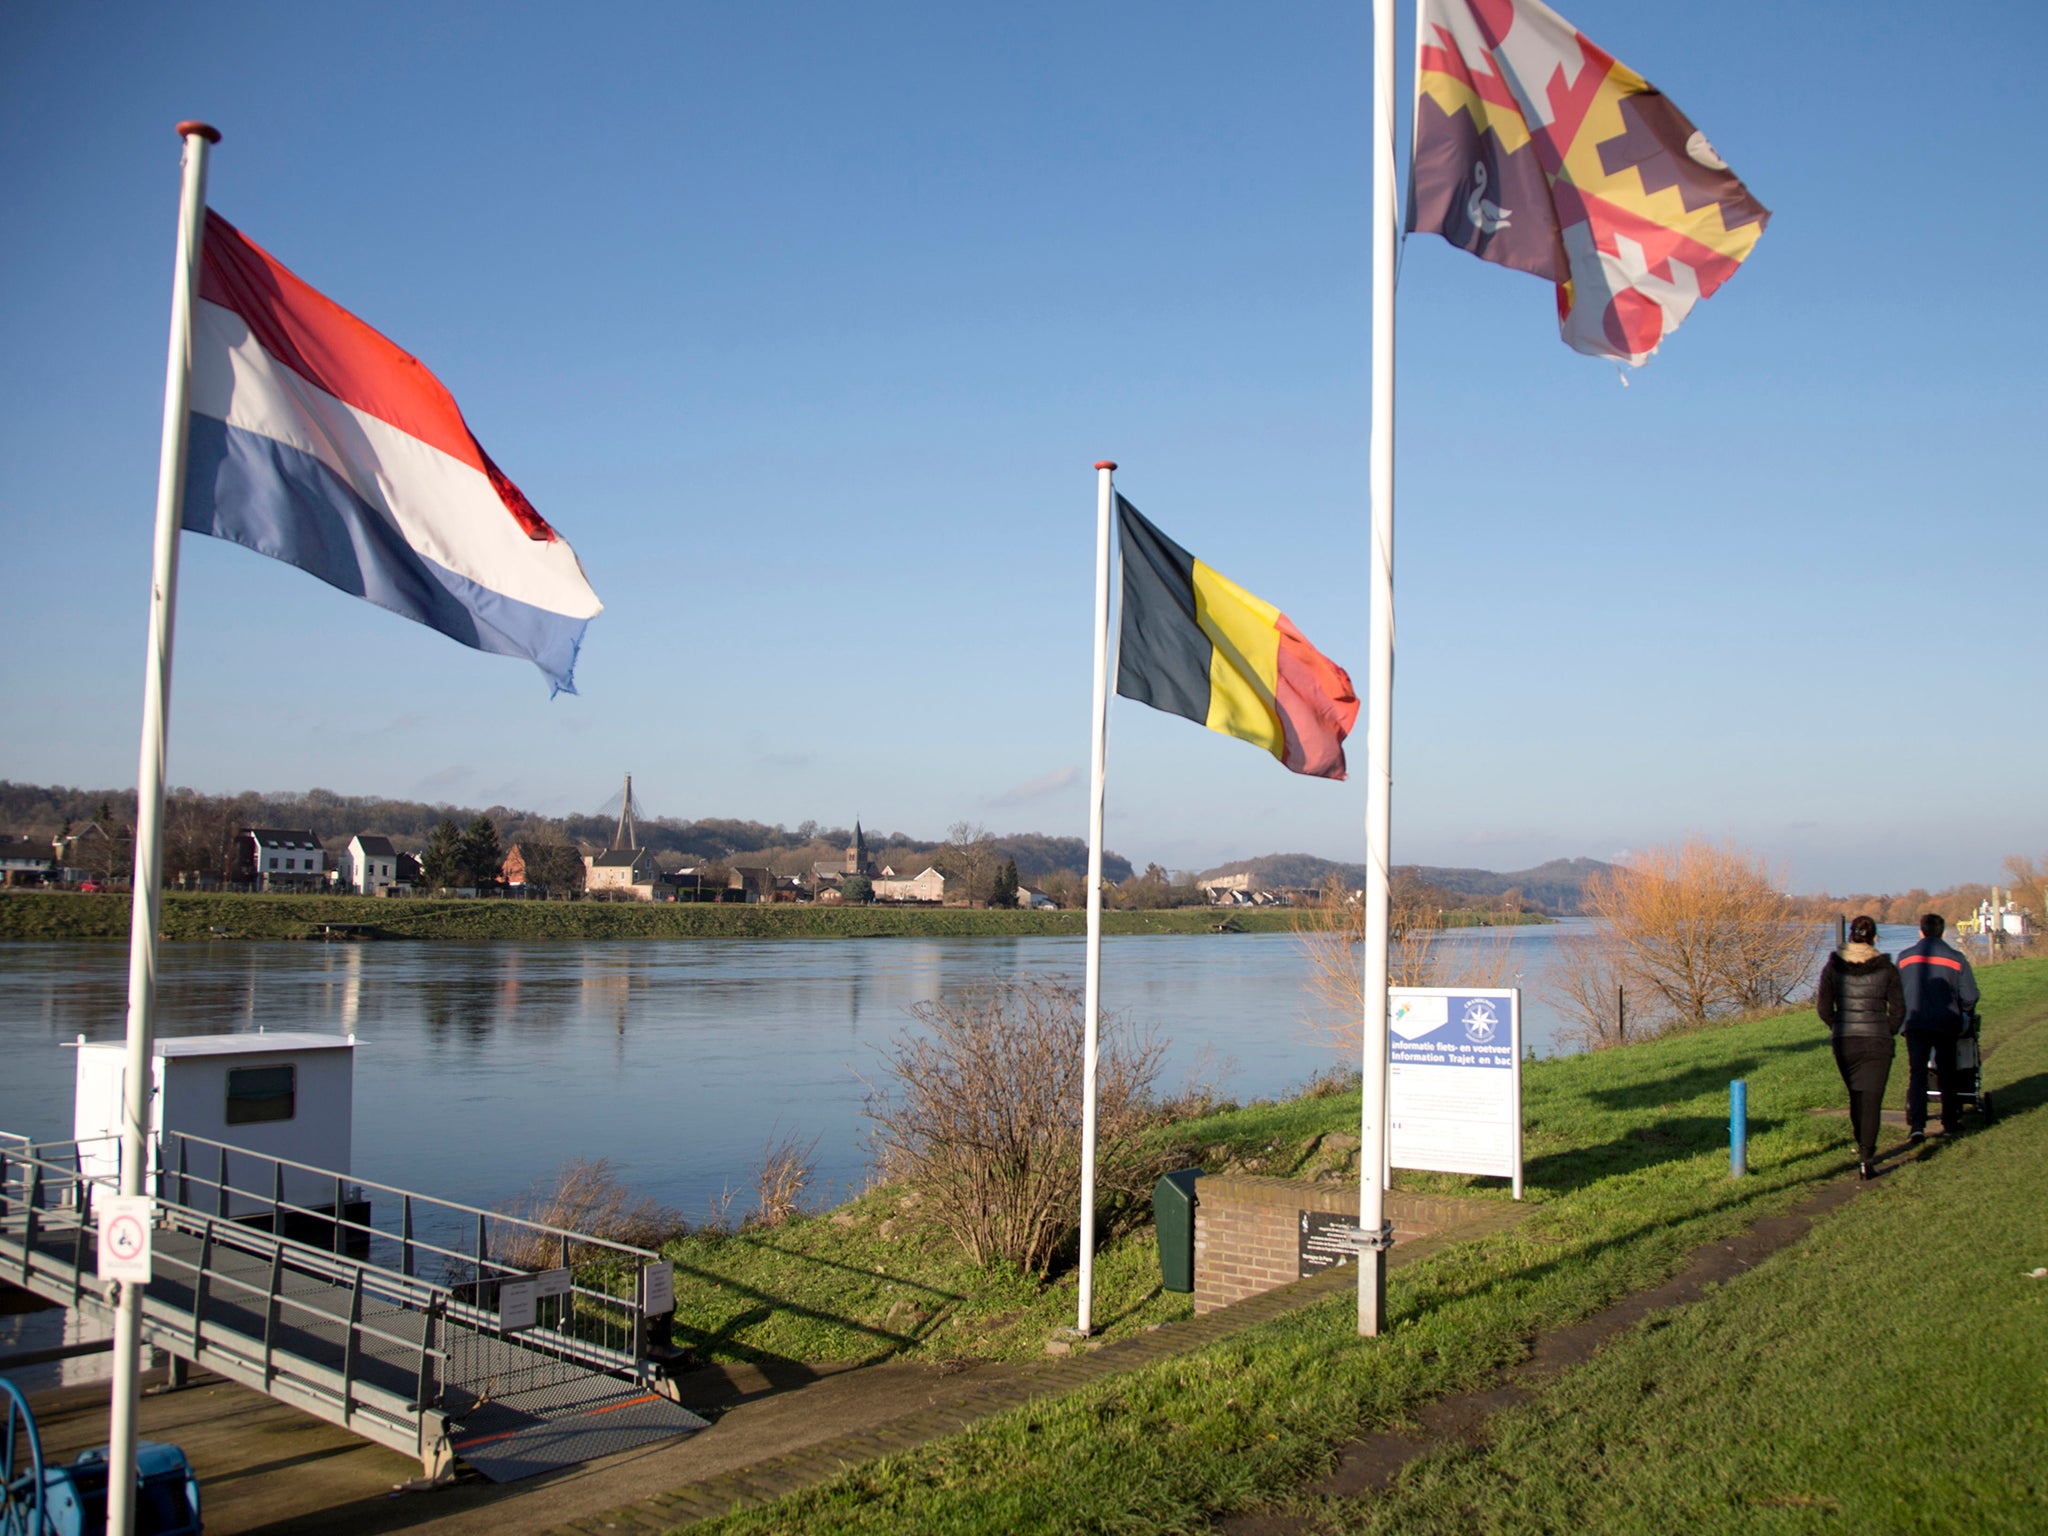 While Belgium will be losing a splendid piece of nature that juts into the Meuse River dividing the two nations, it will also unburden itself of a jurisdictional nightmare that developed over time as the river meandered to turn the portion of land belonging to Belgium — about 15 soccer fields worth — into a peninsula linked only to the Netherlands.